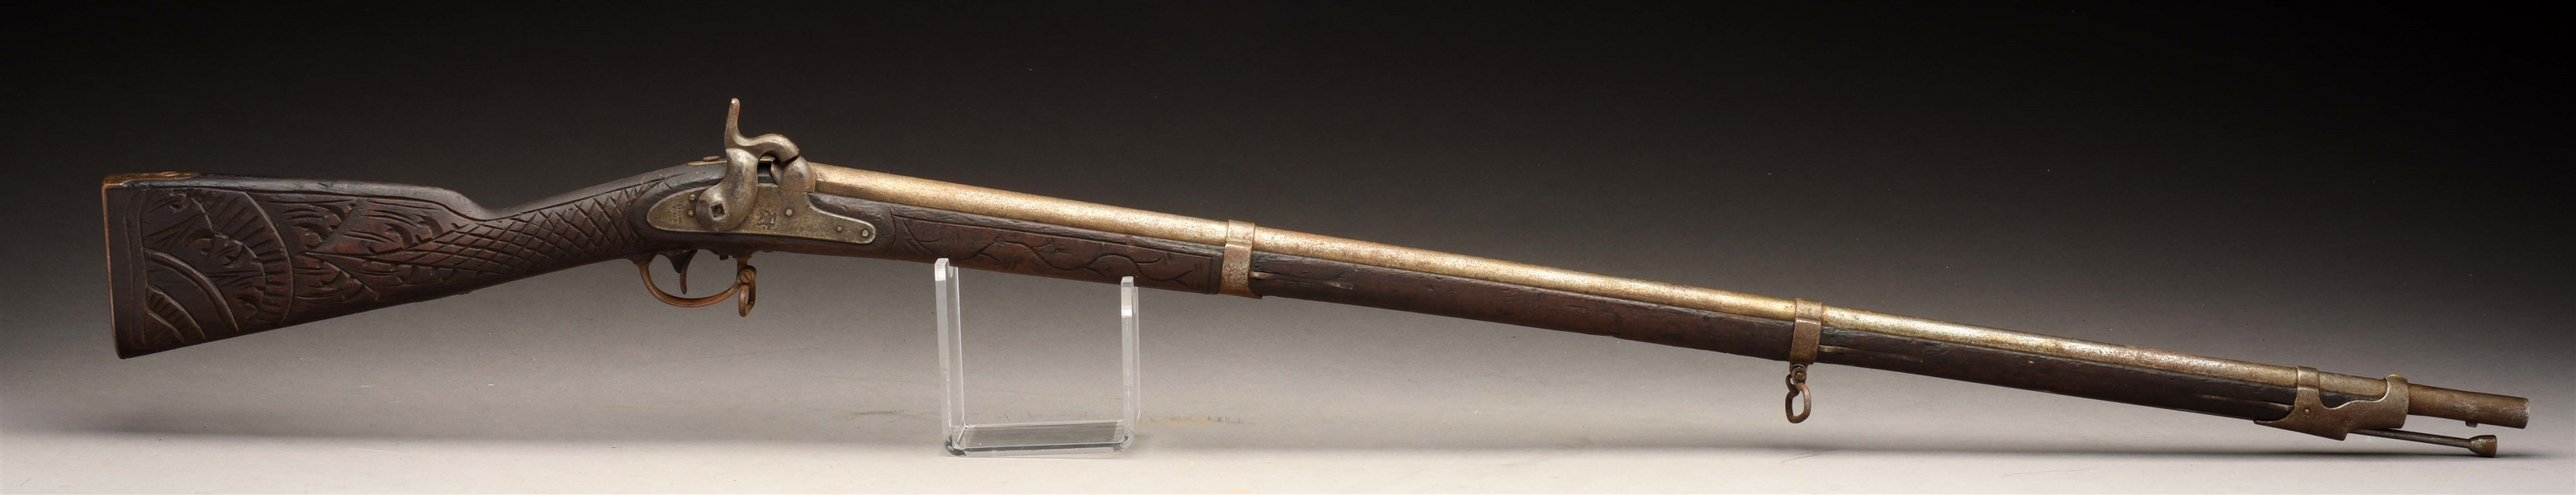 U.S. MODEL 1851 CADET MUSKET FROM FOX STUDIOS WITH CARVED STOCK.